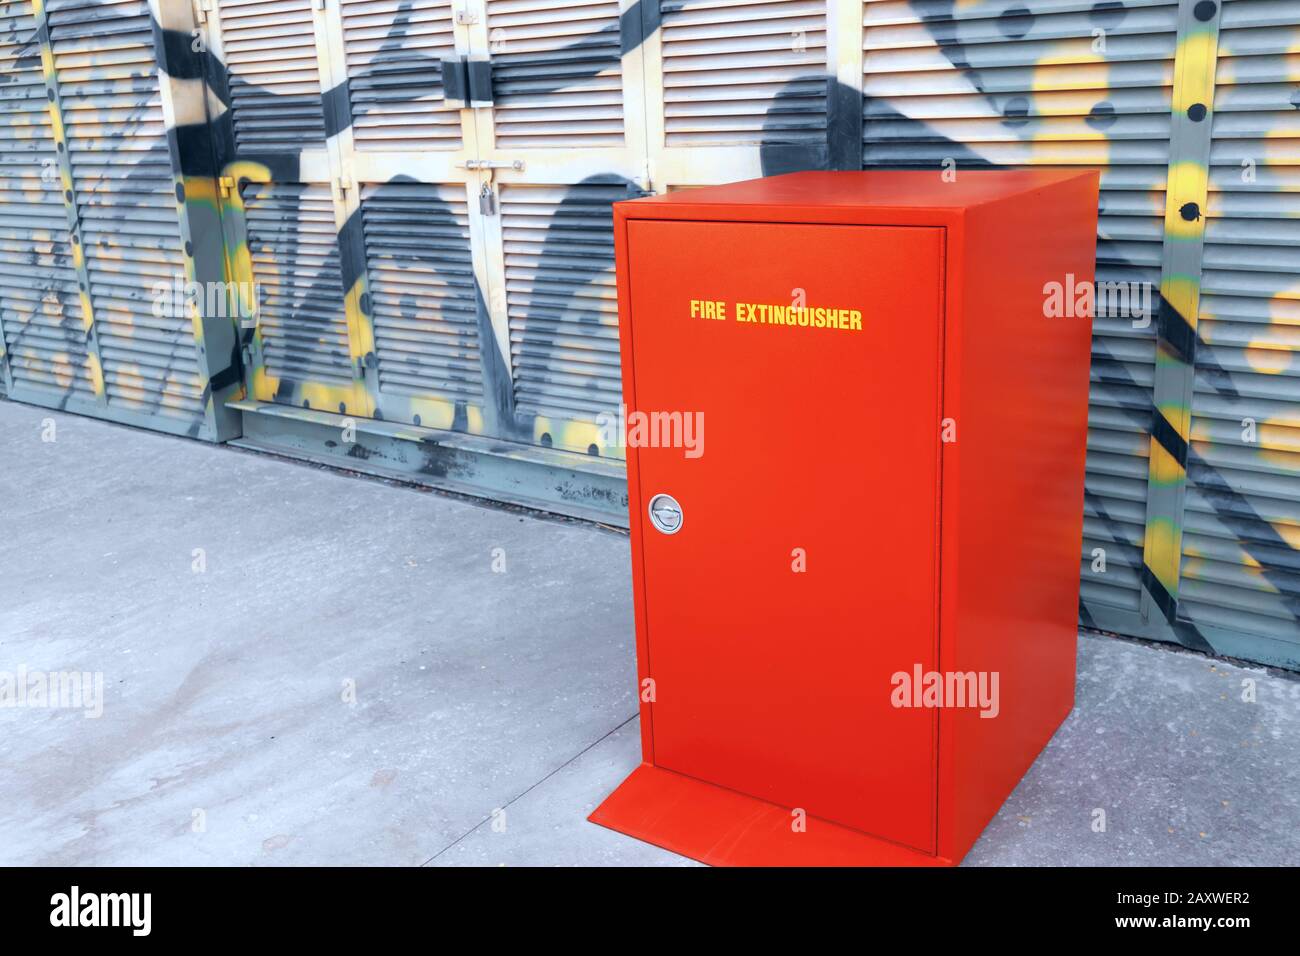 Fire Extinguisher red closet standing near building Stock Photo